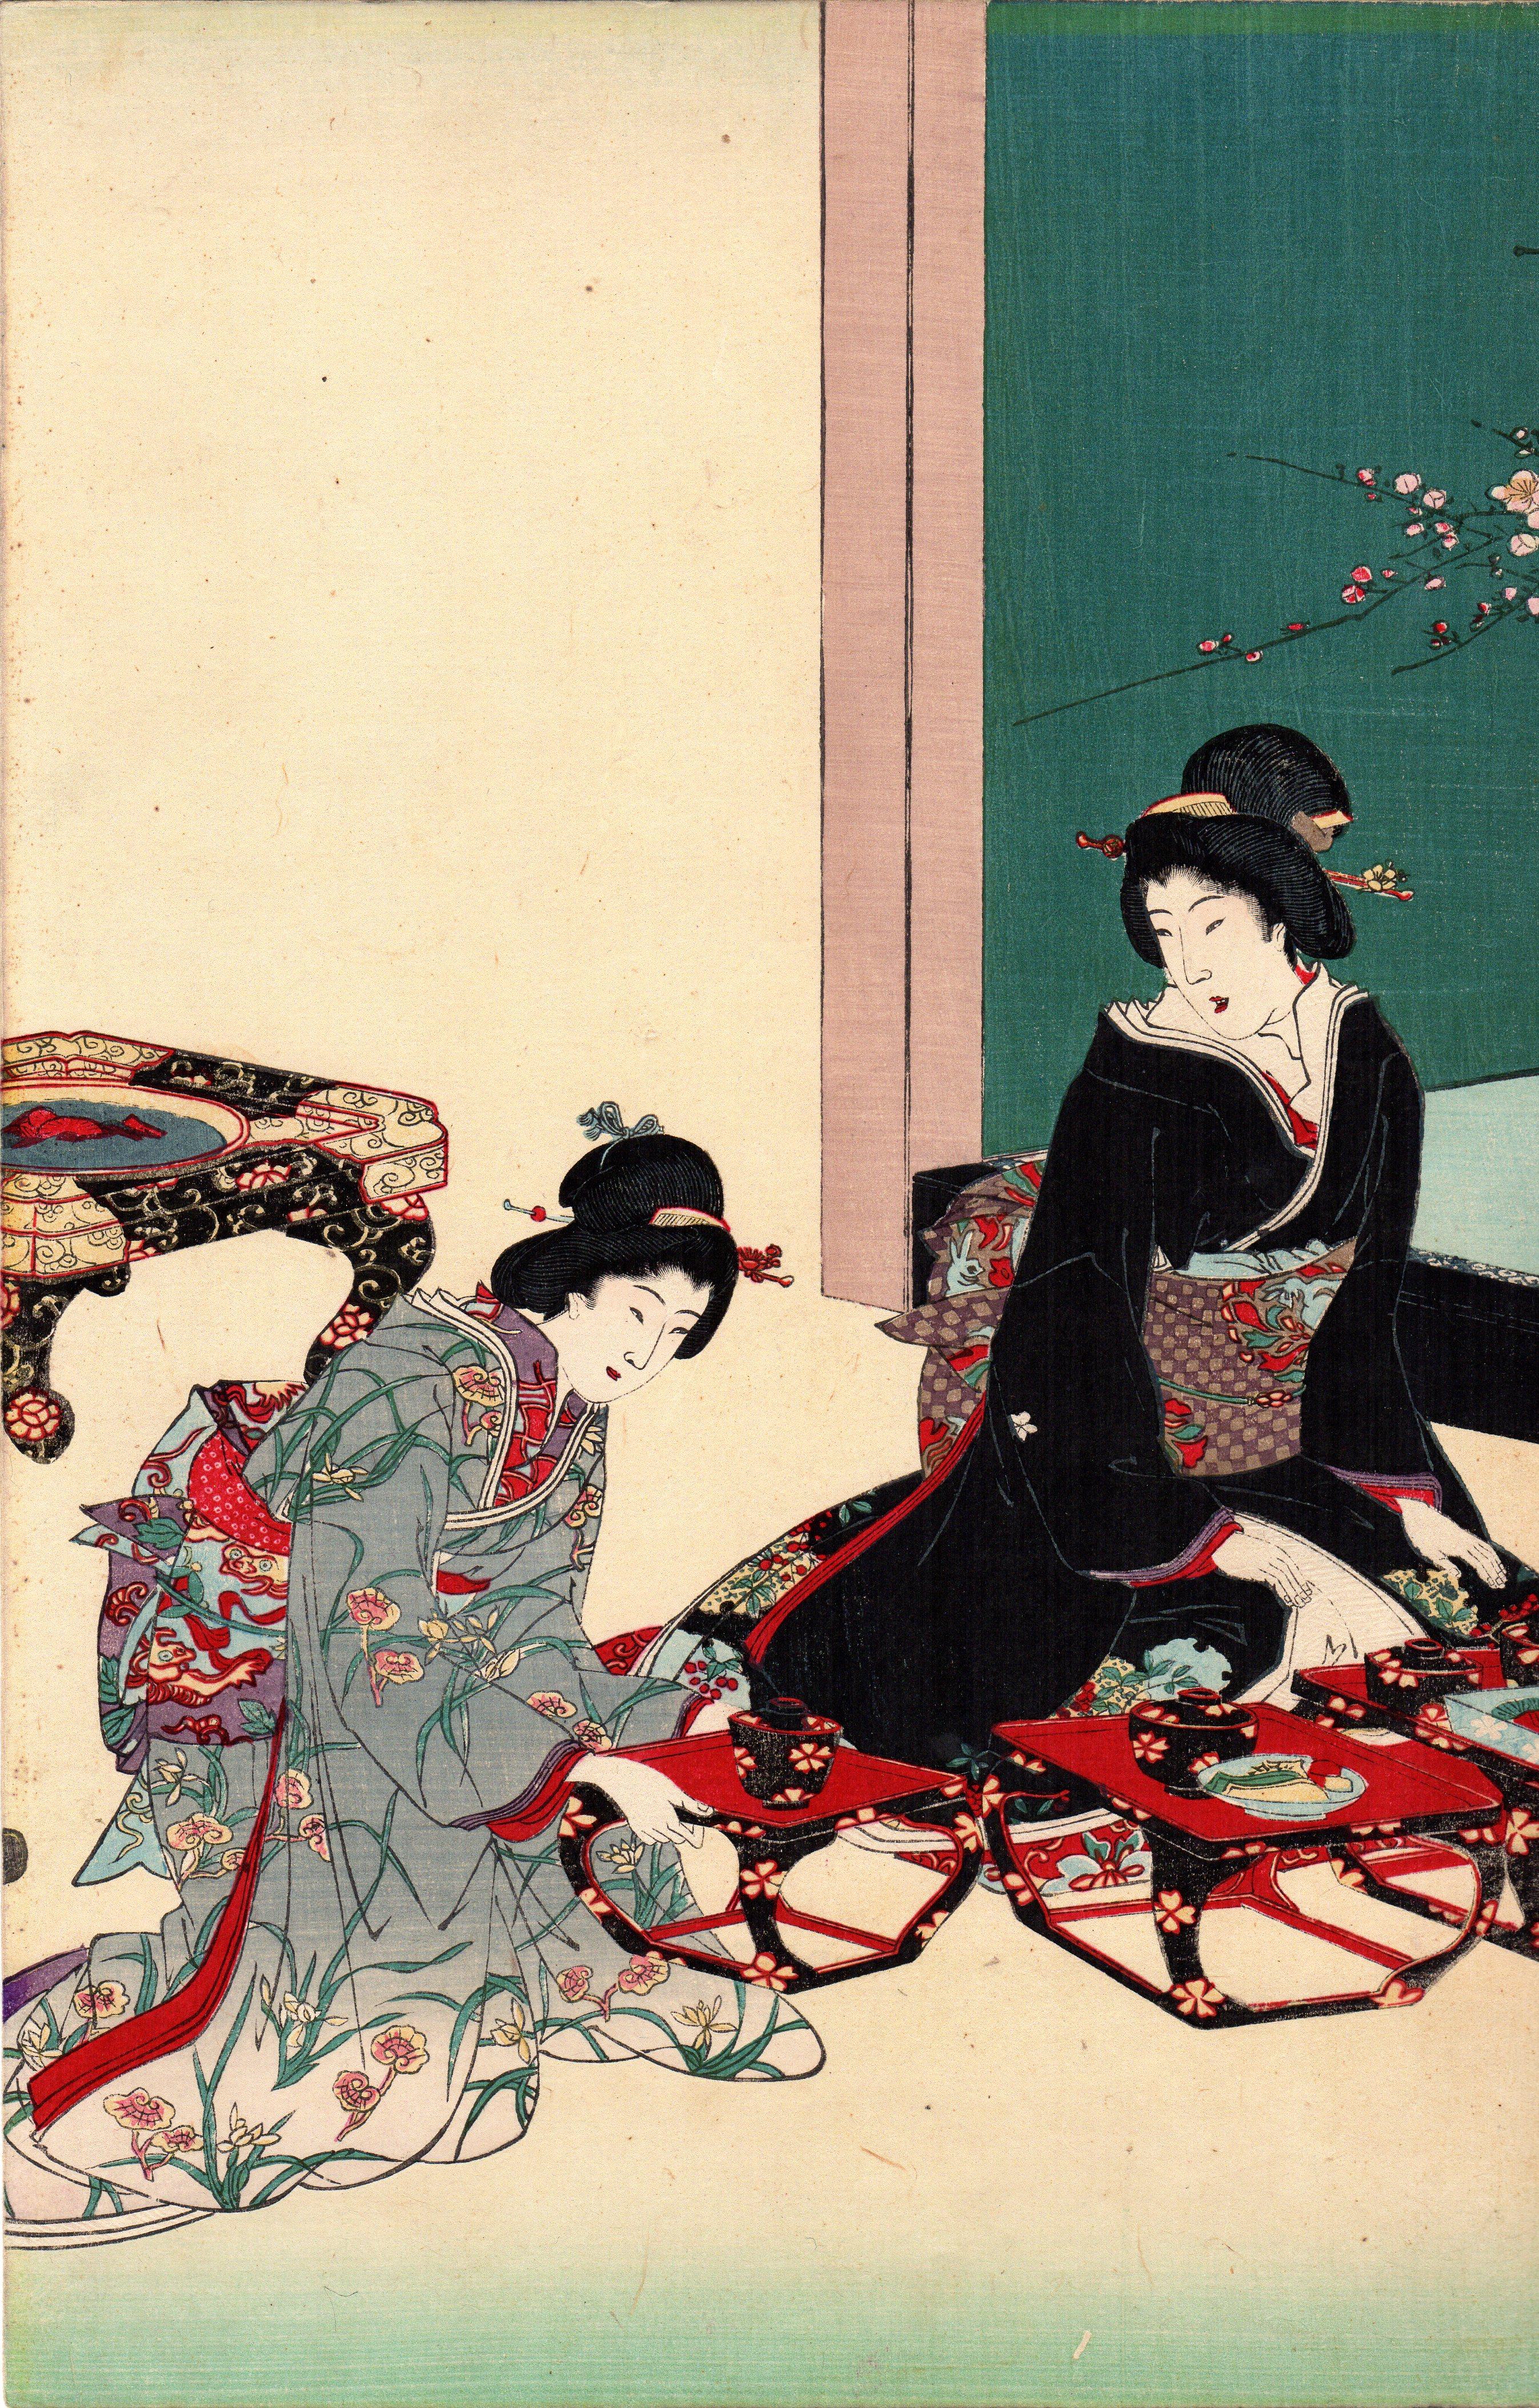 Hand-Painted Original Japanese Triptych Color Woodblock Print by Toyohara Chikanobu For Sale